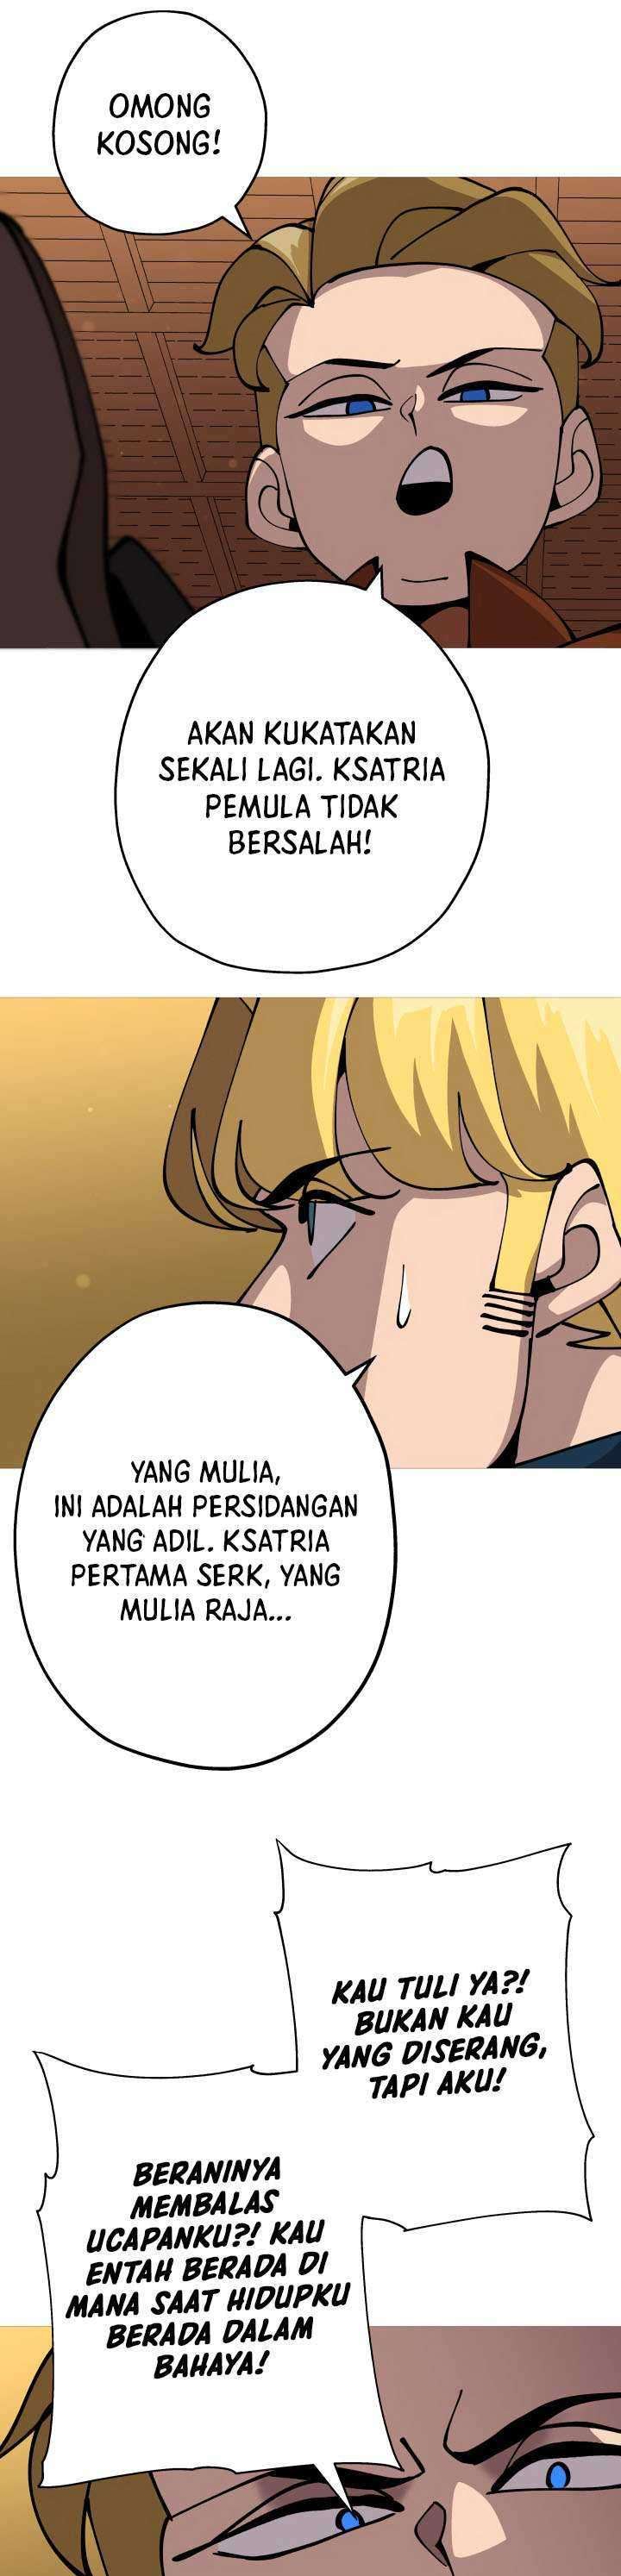 Dilarang COPAS - situs resmi www.mangacanblog.com - Komik the story of a low rank soldier becoming a monarch 034 - chapter 34 35 Indonesia the story of a low rank soldier becoming a monarch 034 - chapter 34 Terbaru 22|Baca Manga Komik Indonesia|Mangacan